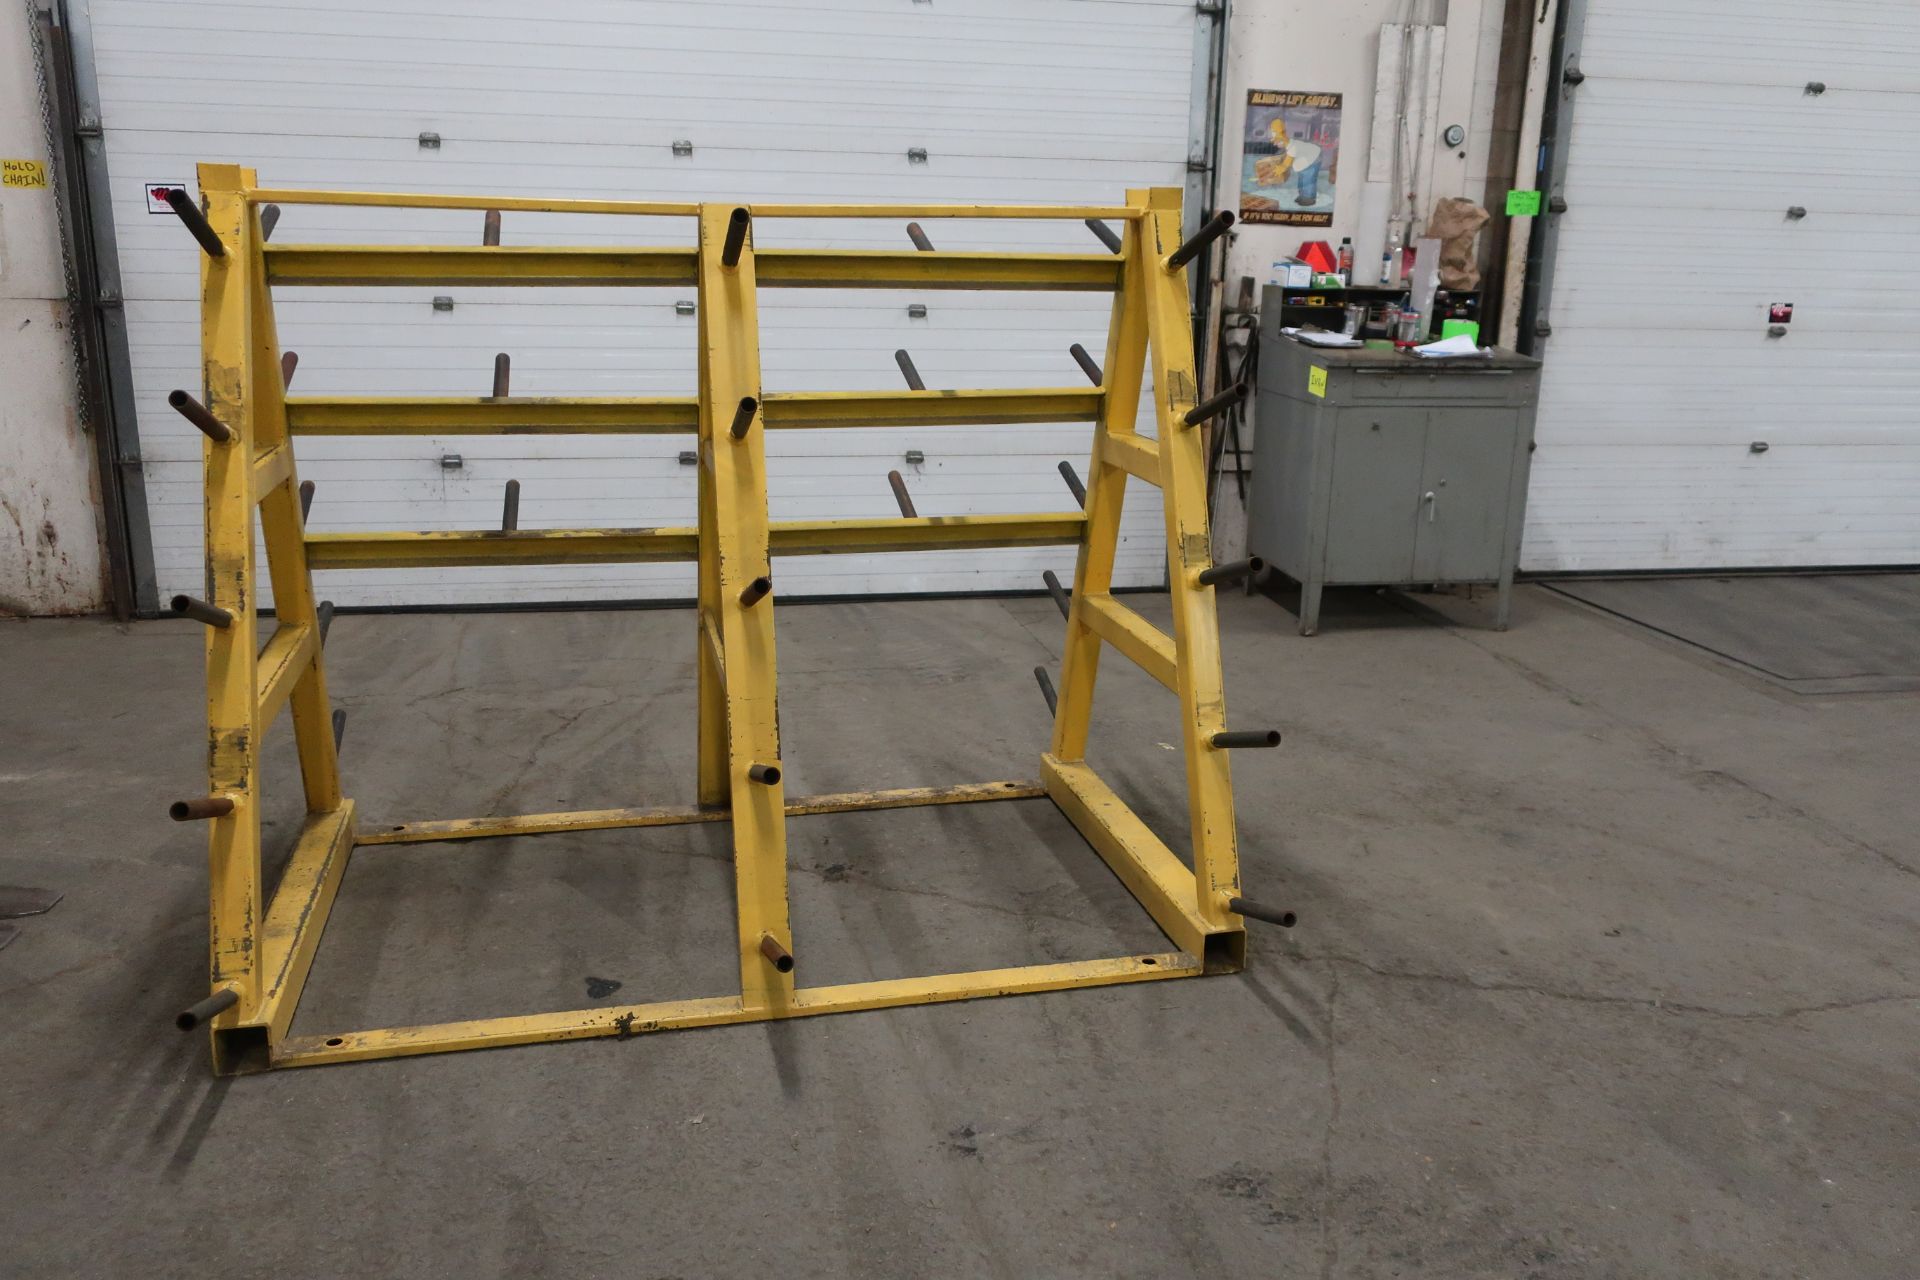 Heavy Duty Shop Rack for Dies and more up to 1500lbs capacity